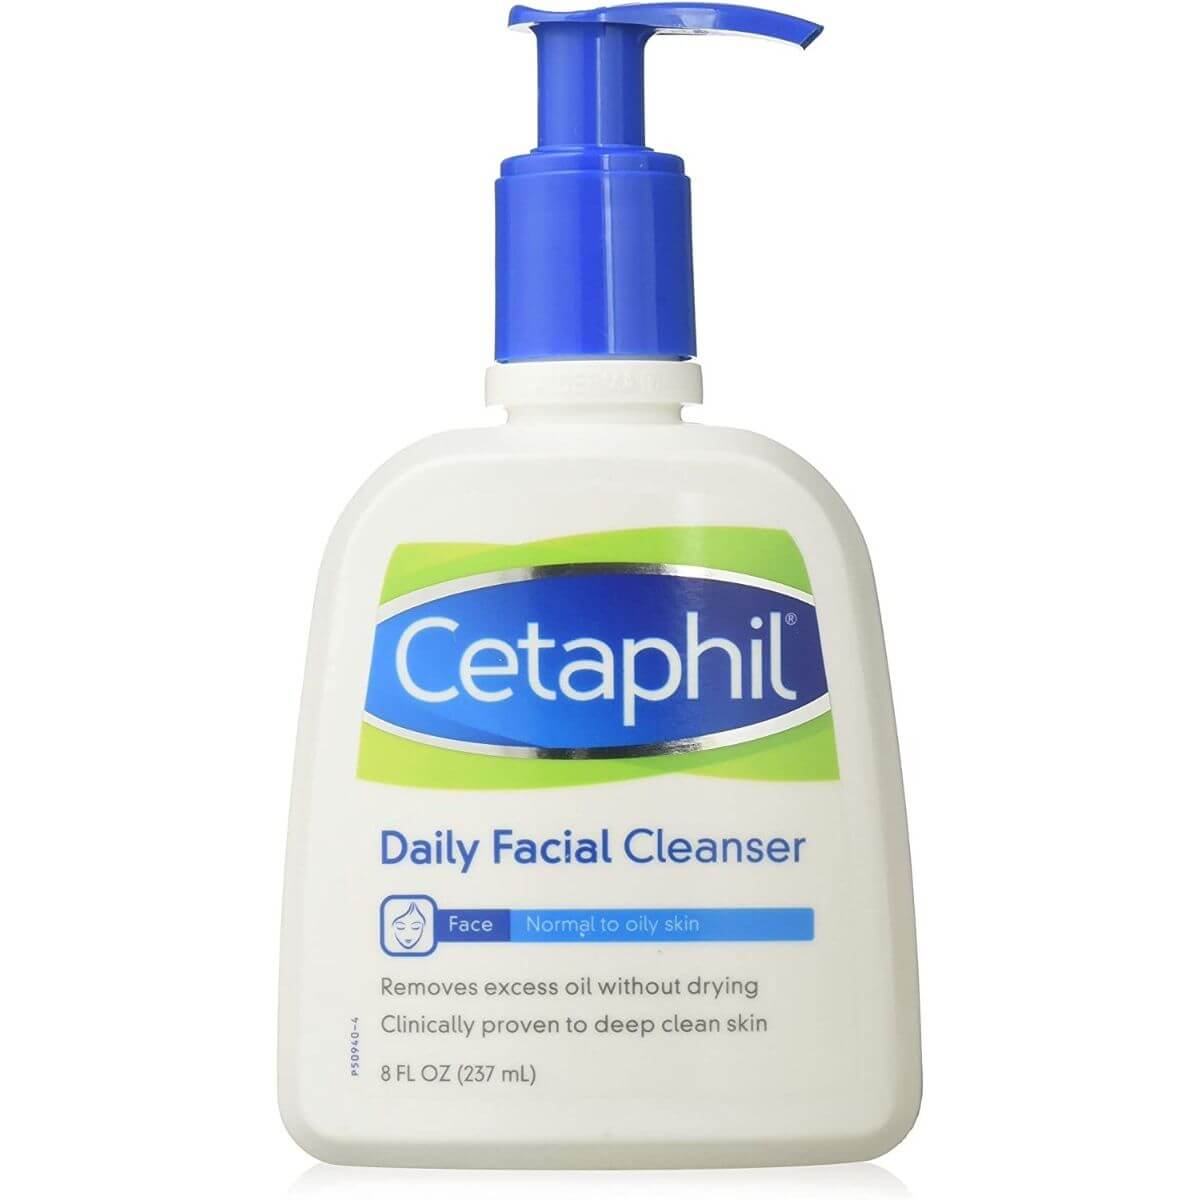 Daily Facial Cleanser for Normal to Oily Skin